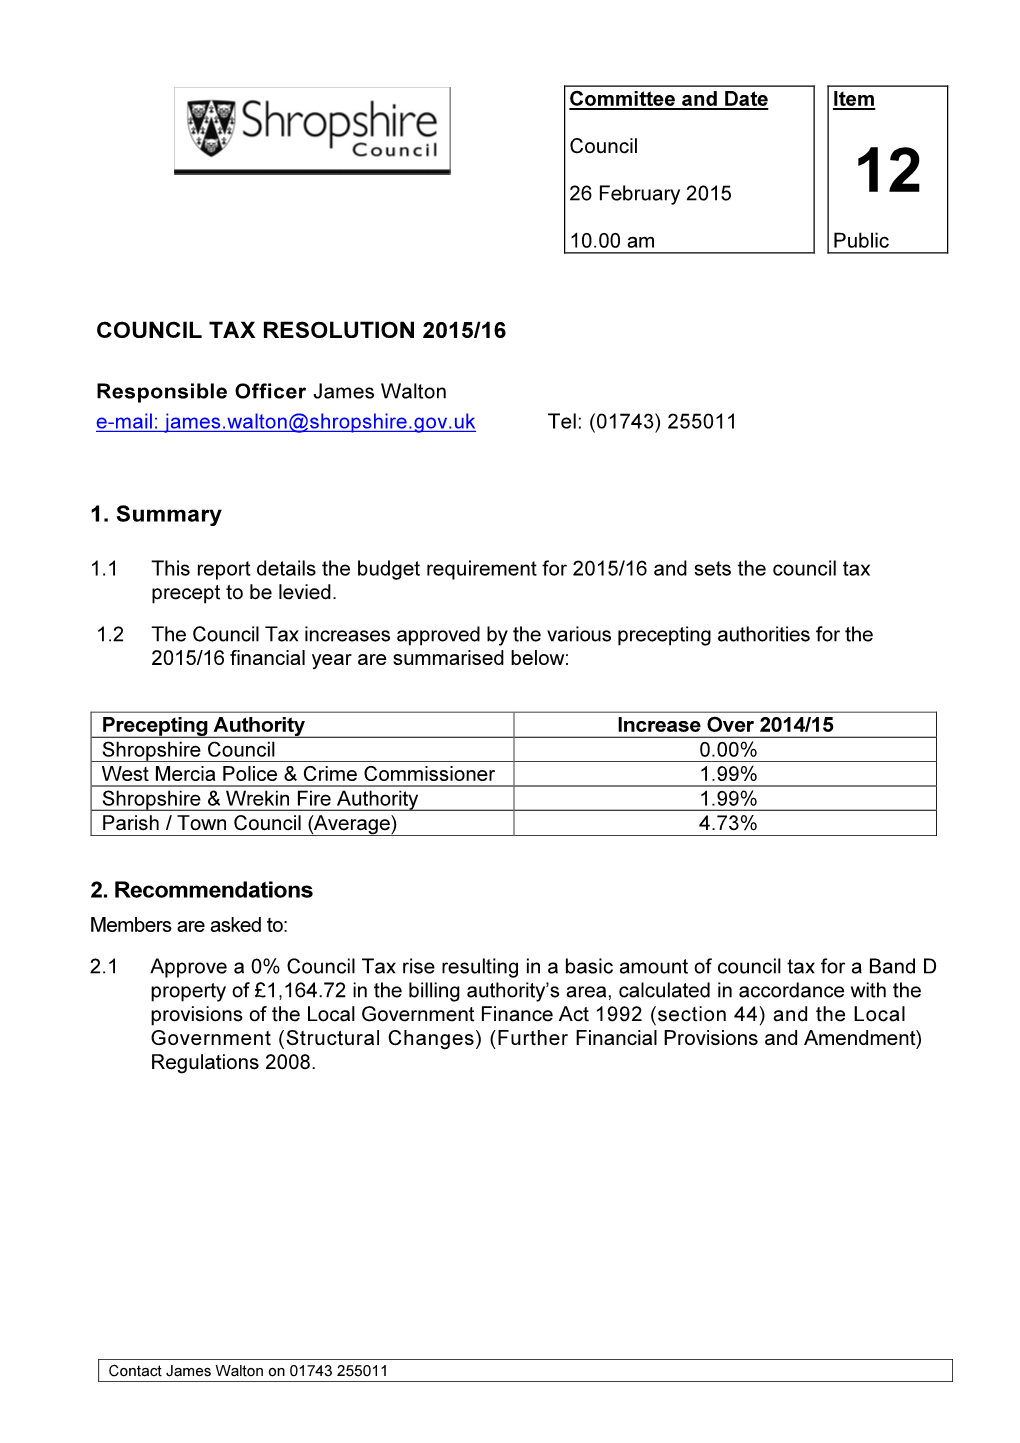 Council Tax Resolution 2015/16 1